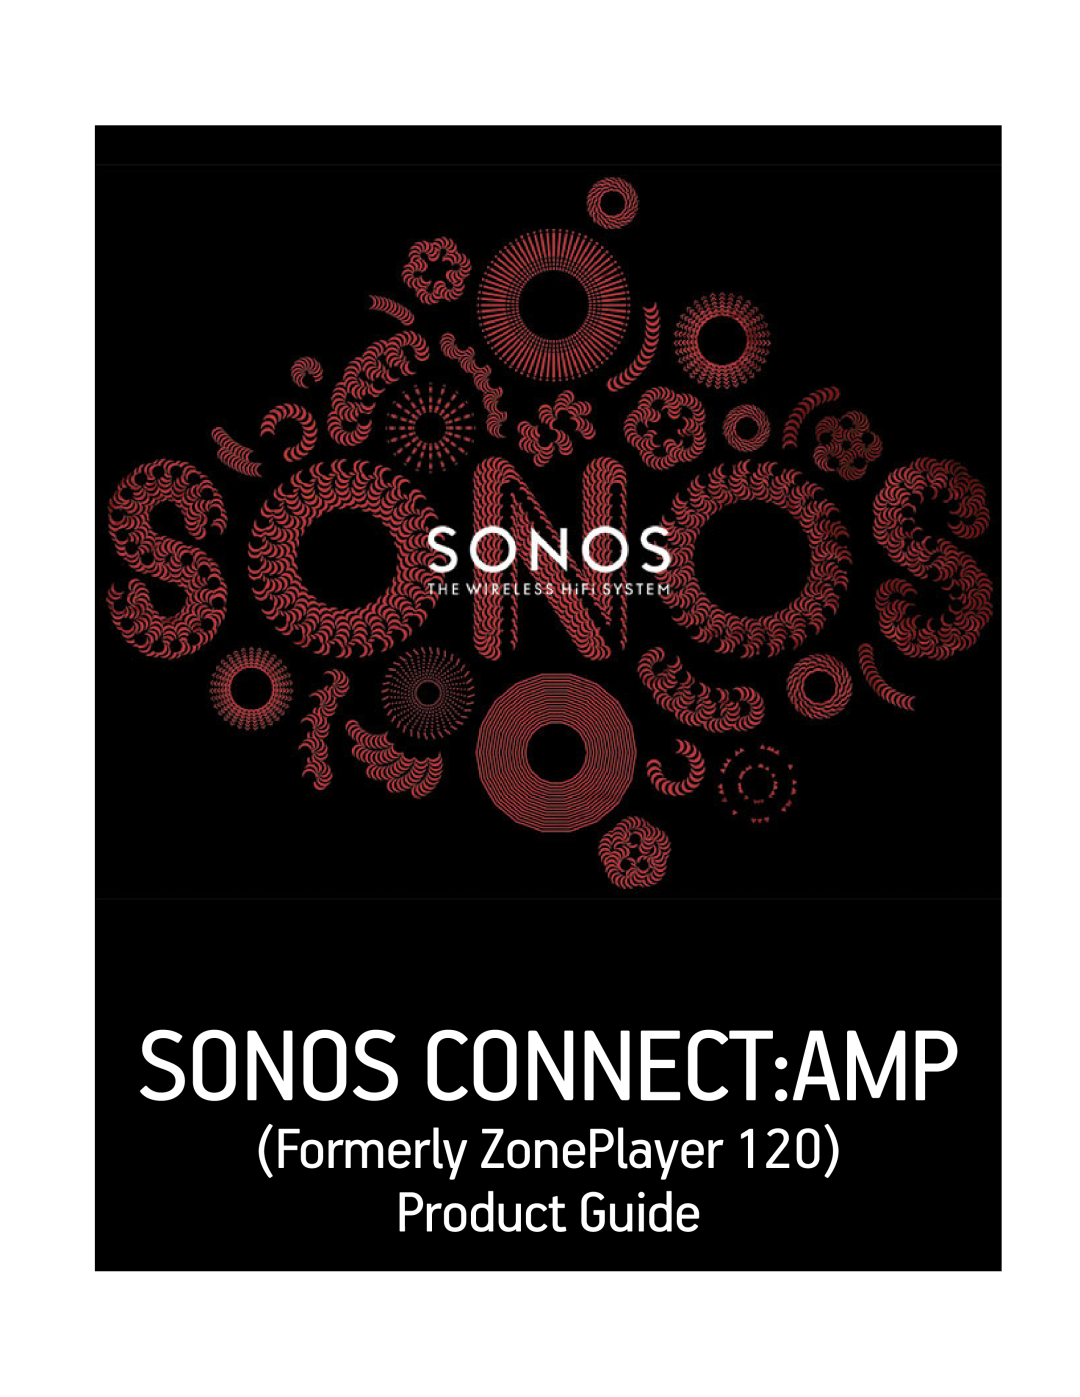 Sonos CONNECTAMP manual Sonos Connect Amp, Formerly ZonePlayer Product Guide 